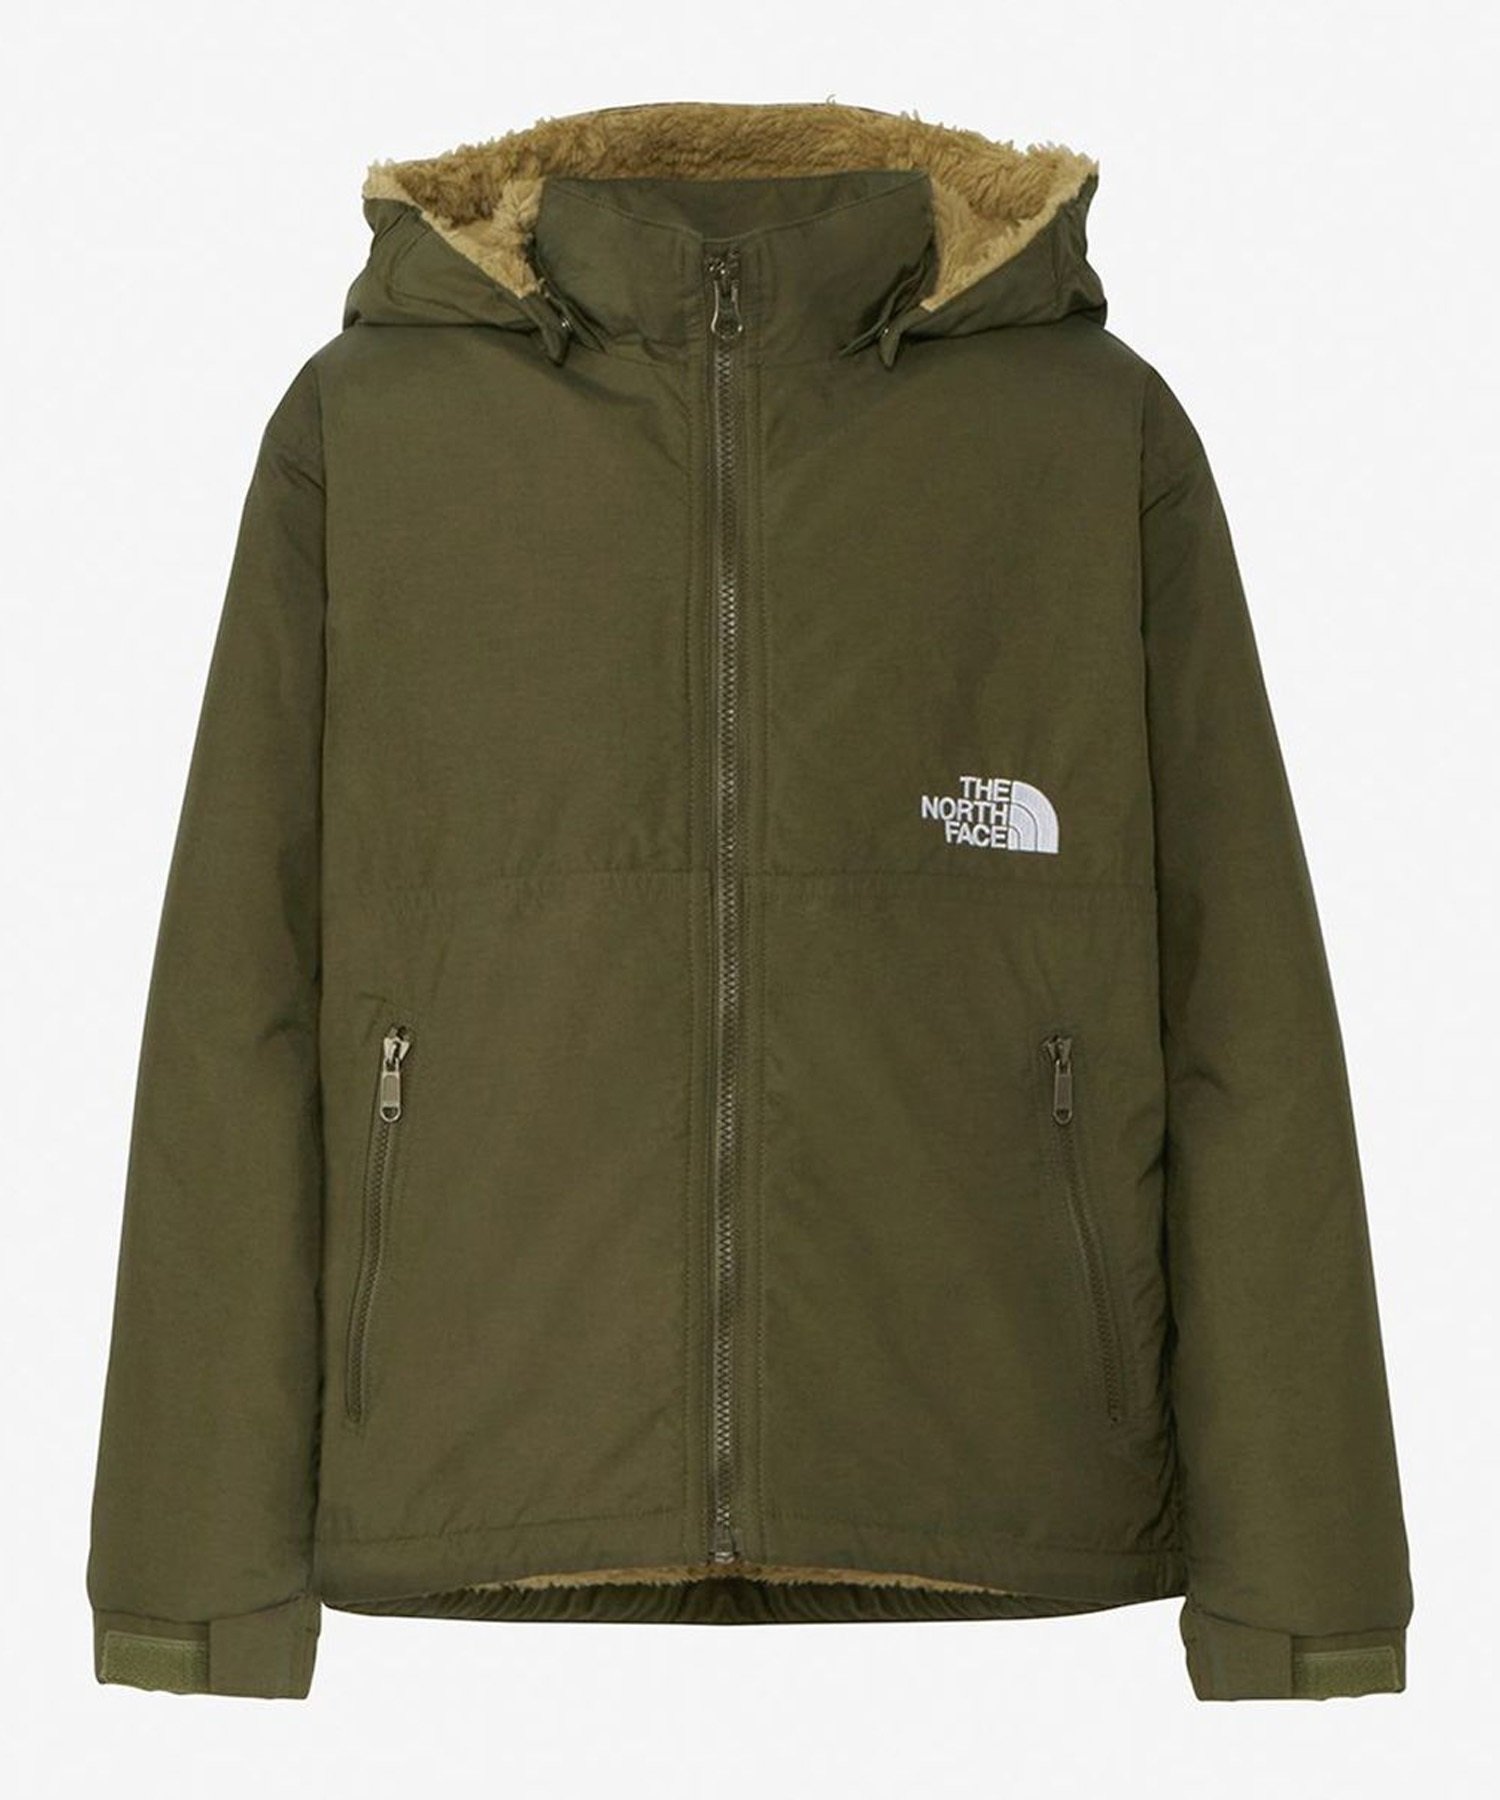 THE NORTH FACE/ザ・ノース・フェイス Compact Nomad Jacket ...